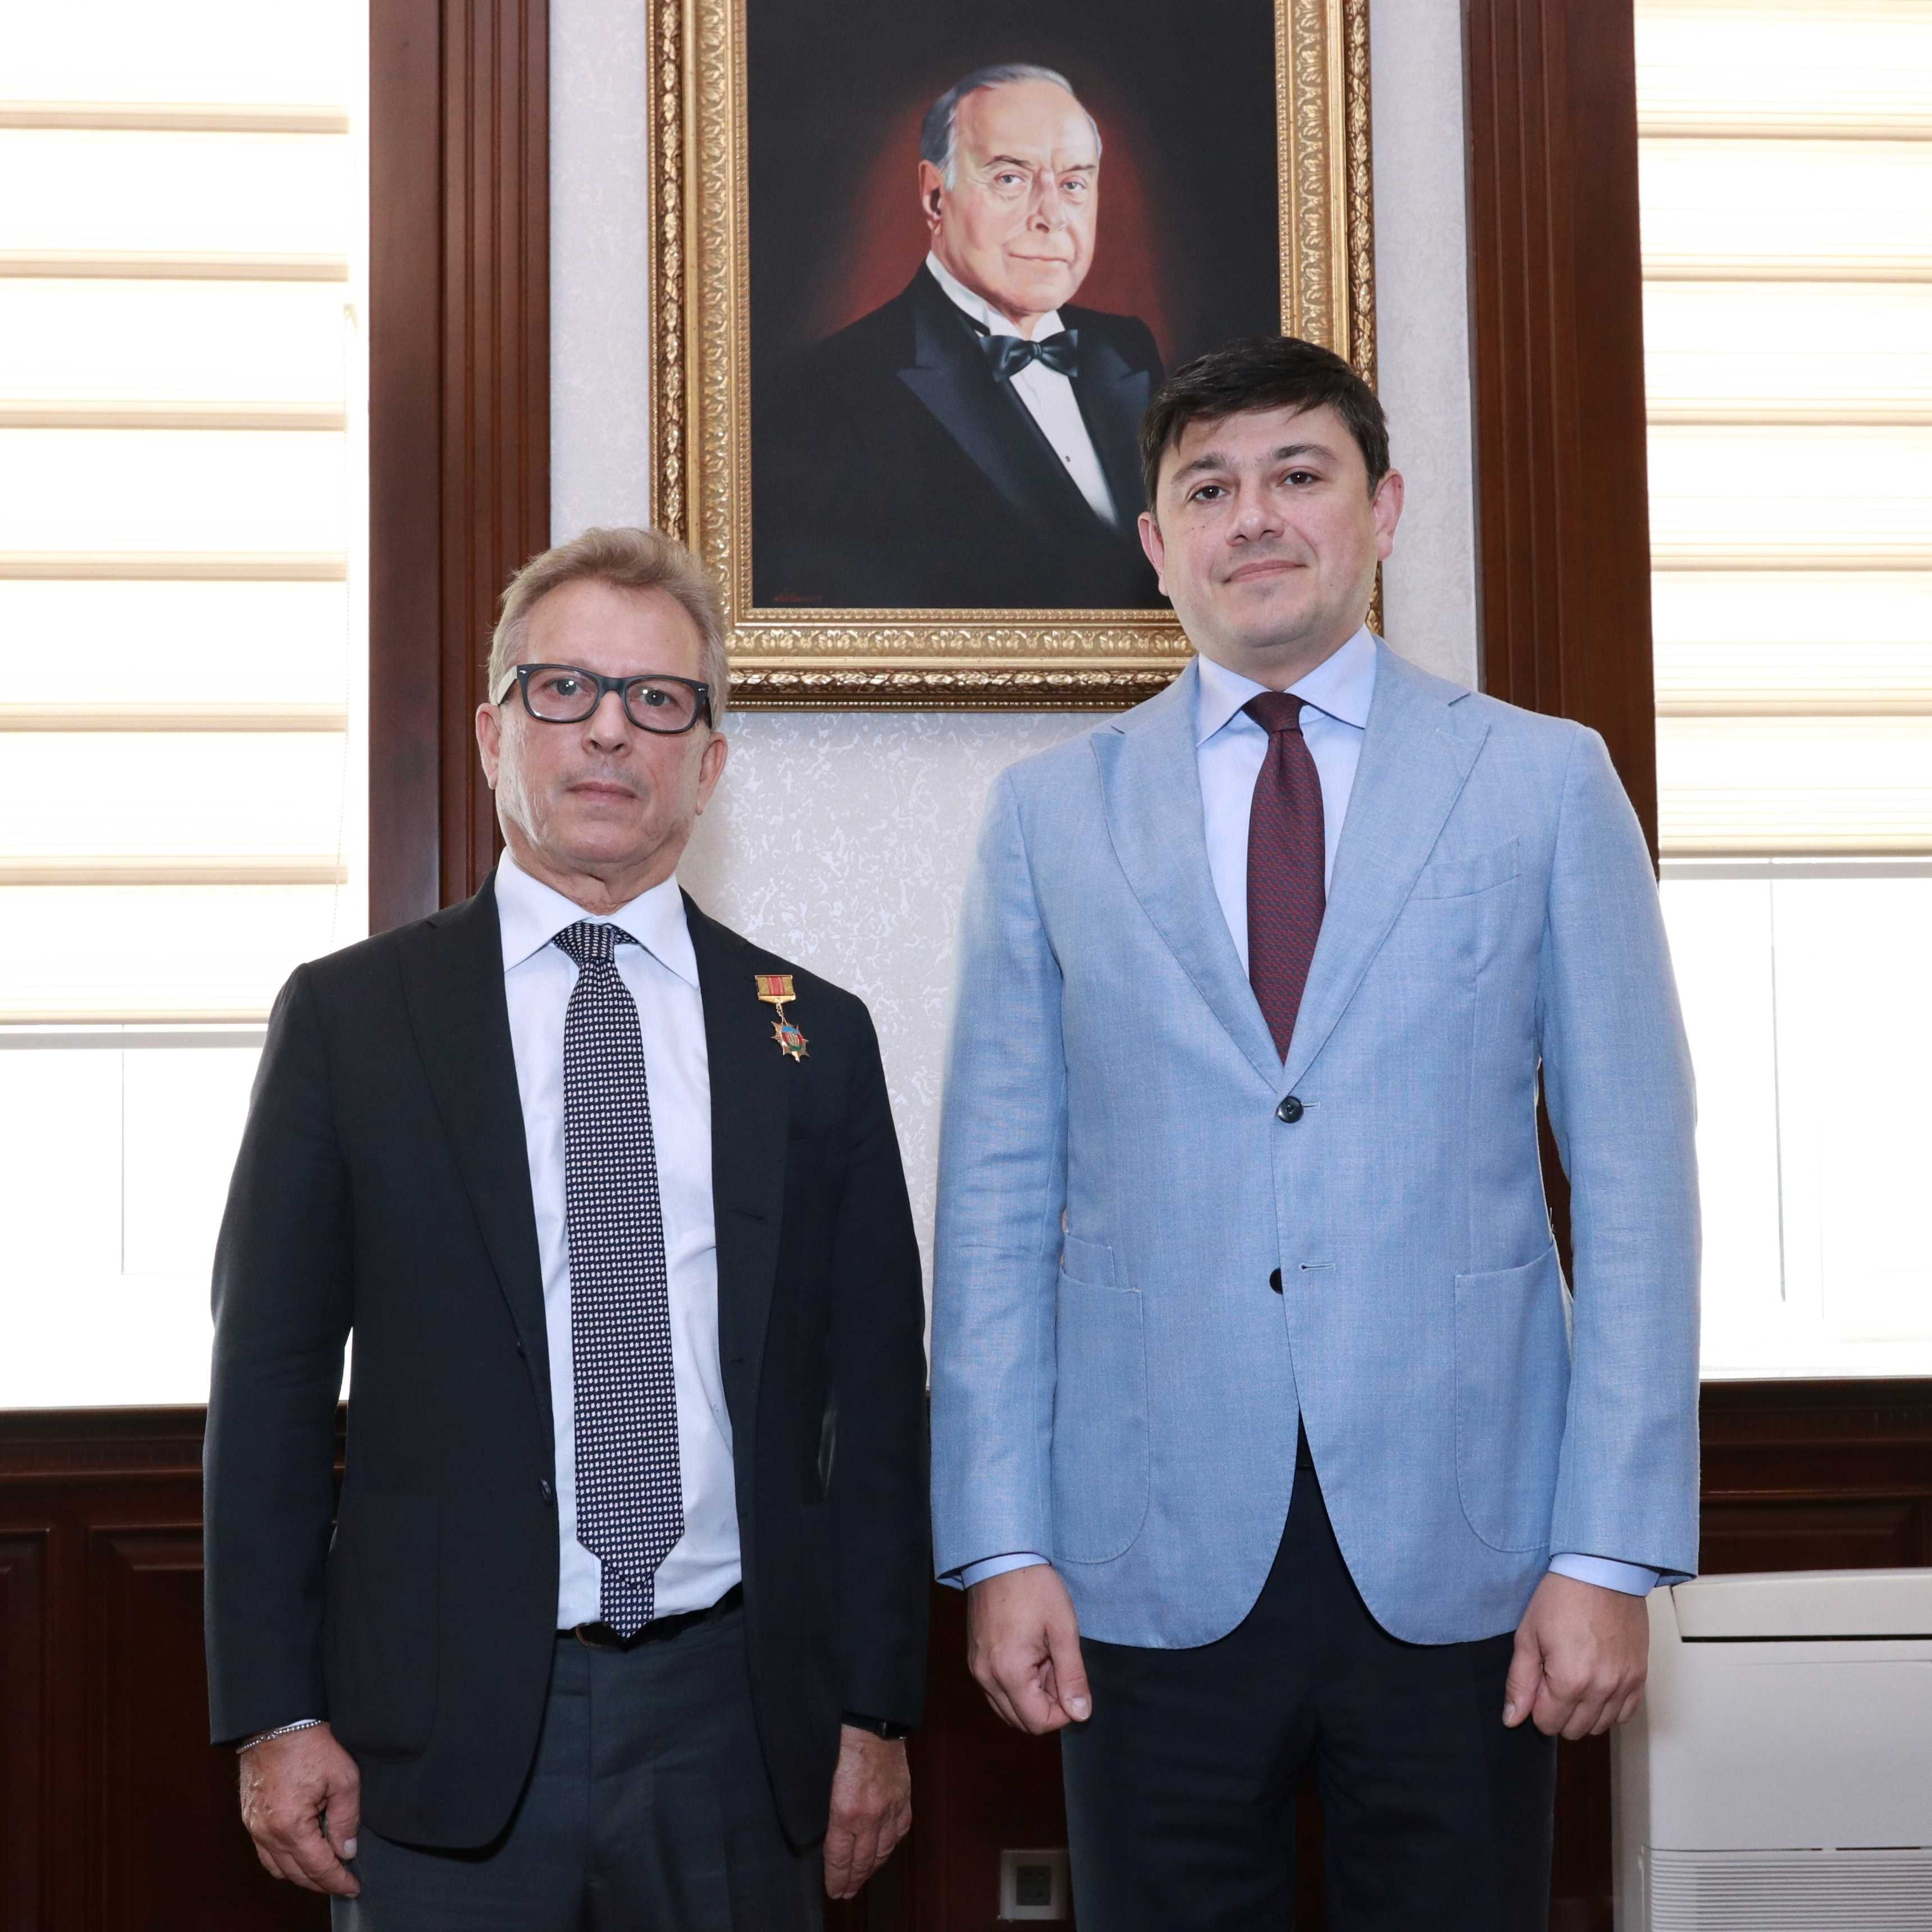 Chairman of the State Committee met with the President of the Naples-Baku Association